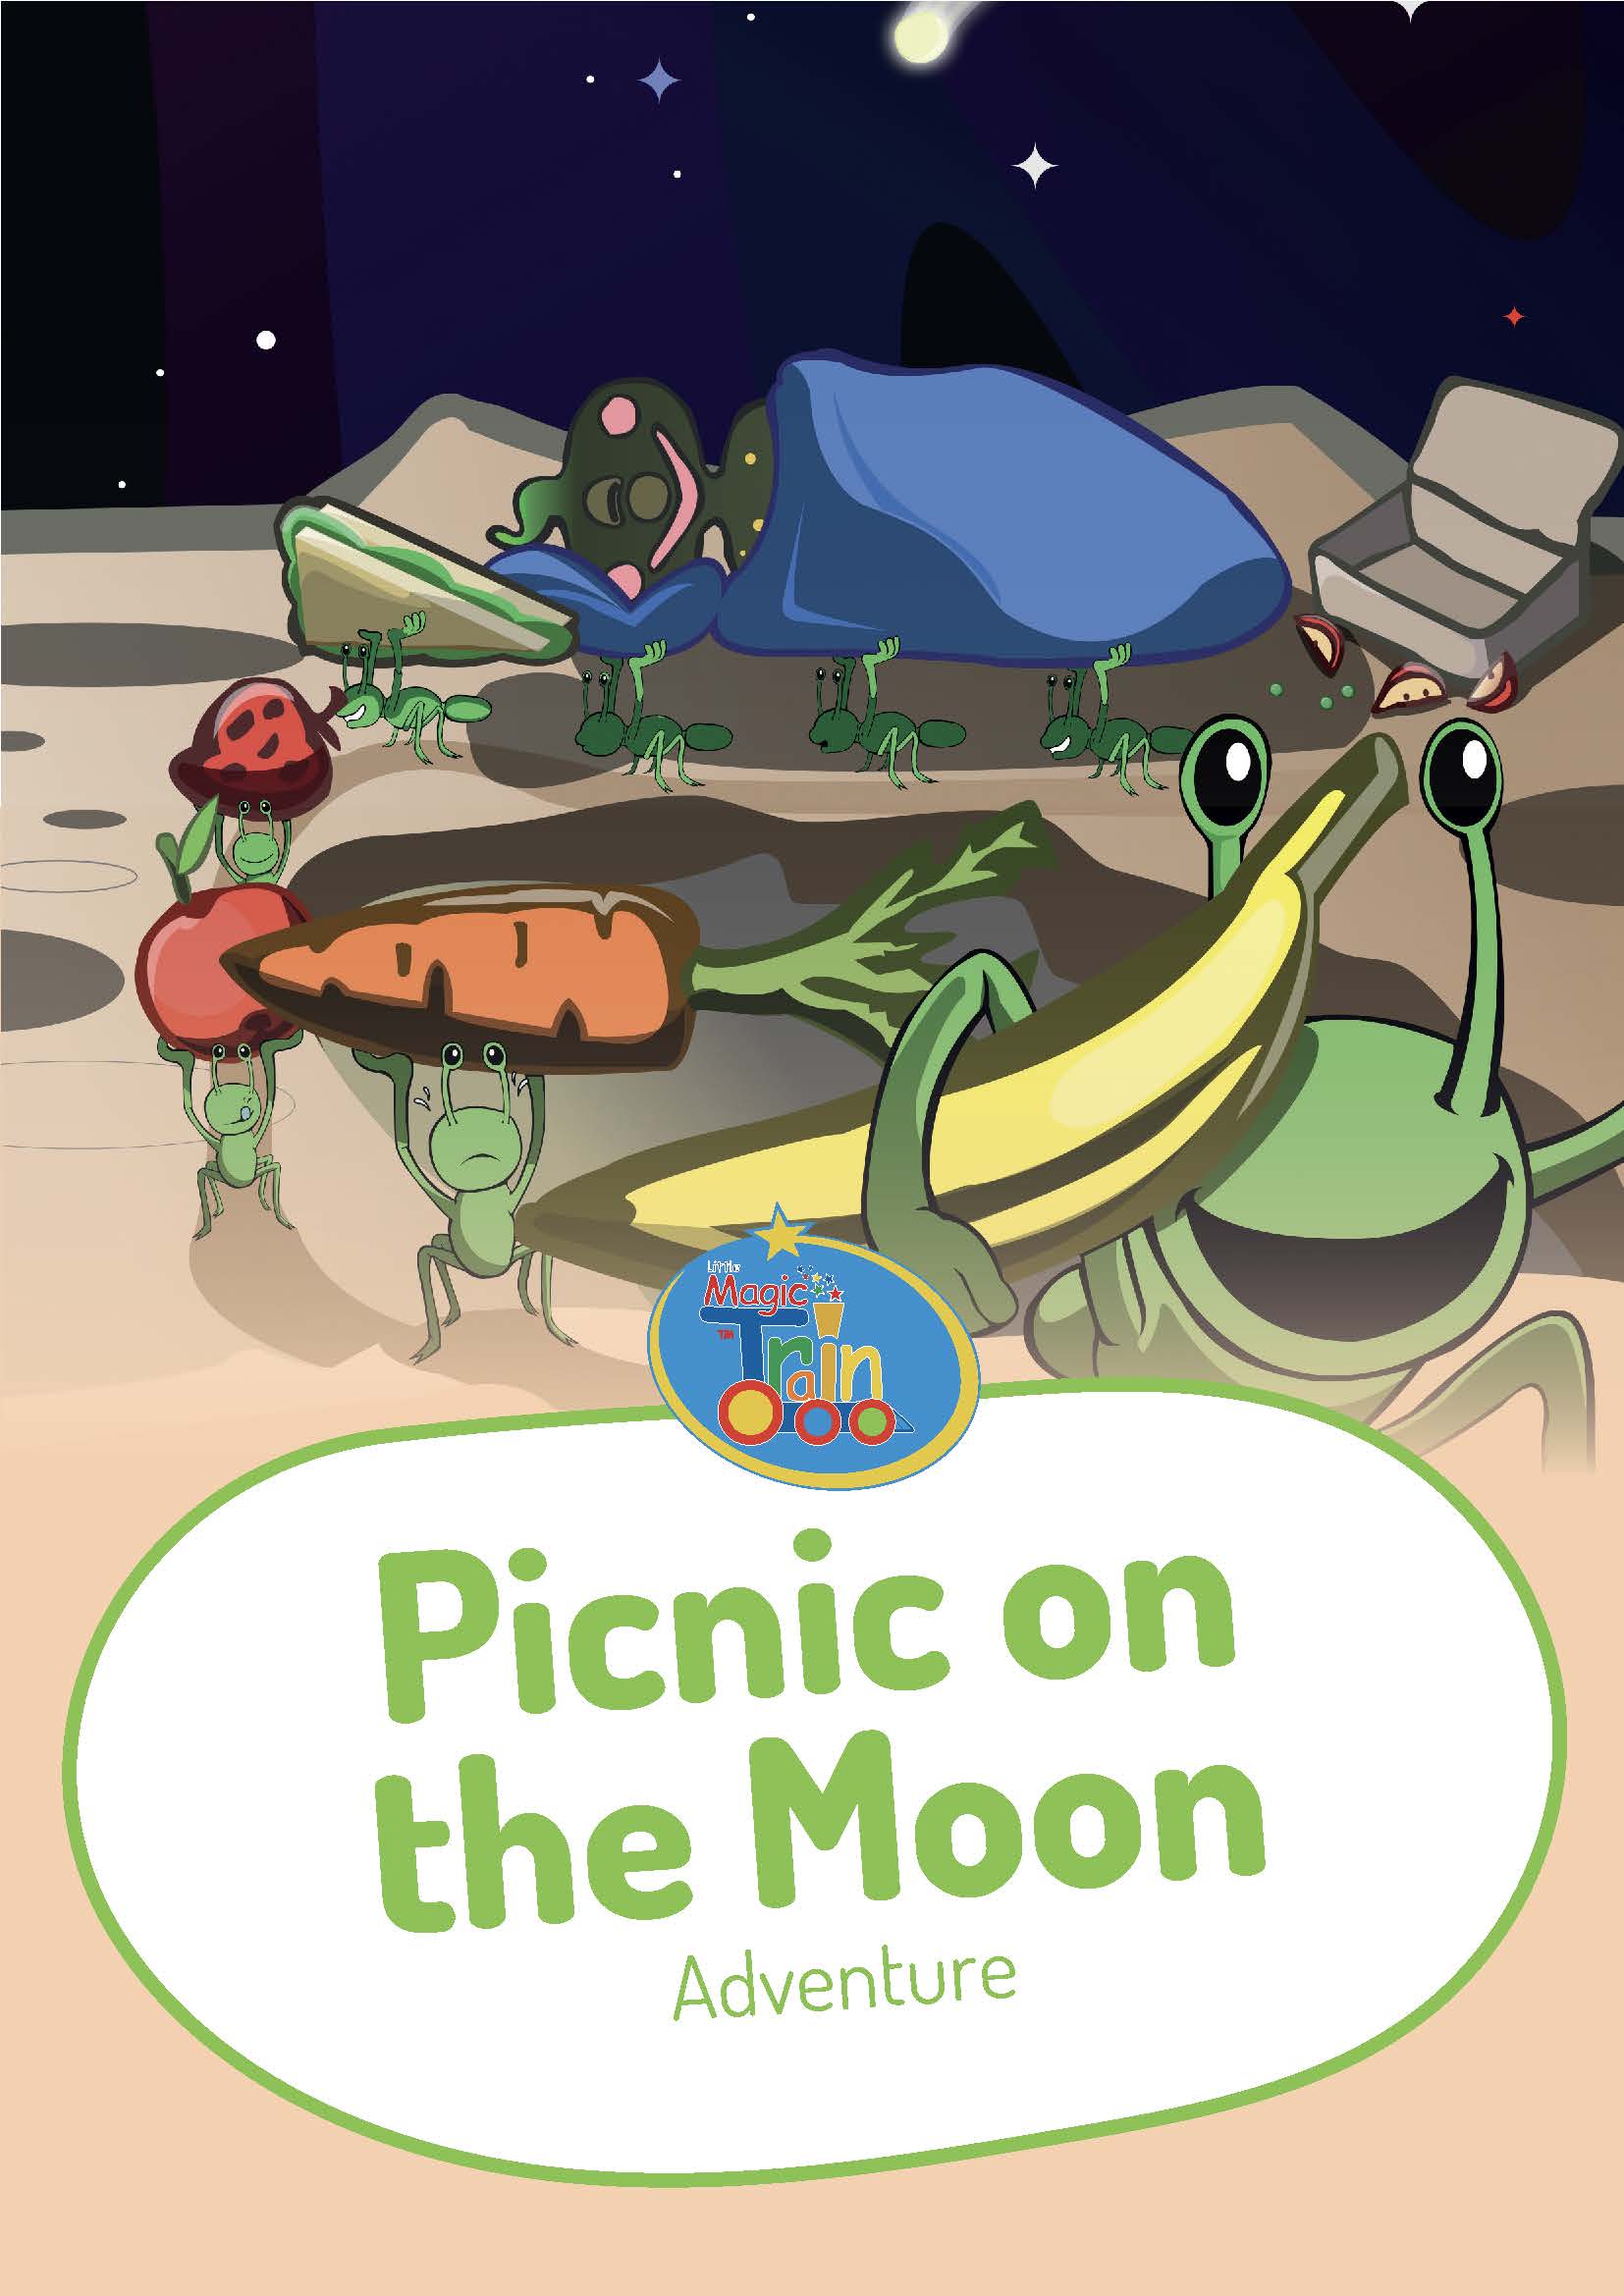 shop-image-adventure-Picnic-on-the-Moon_Page_01